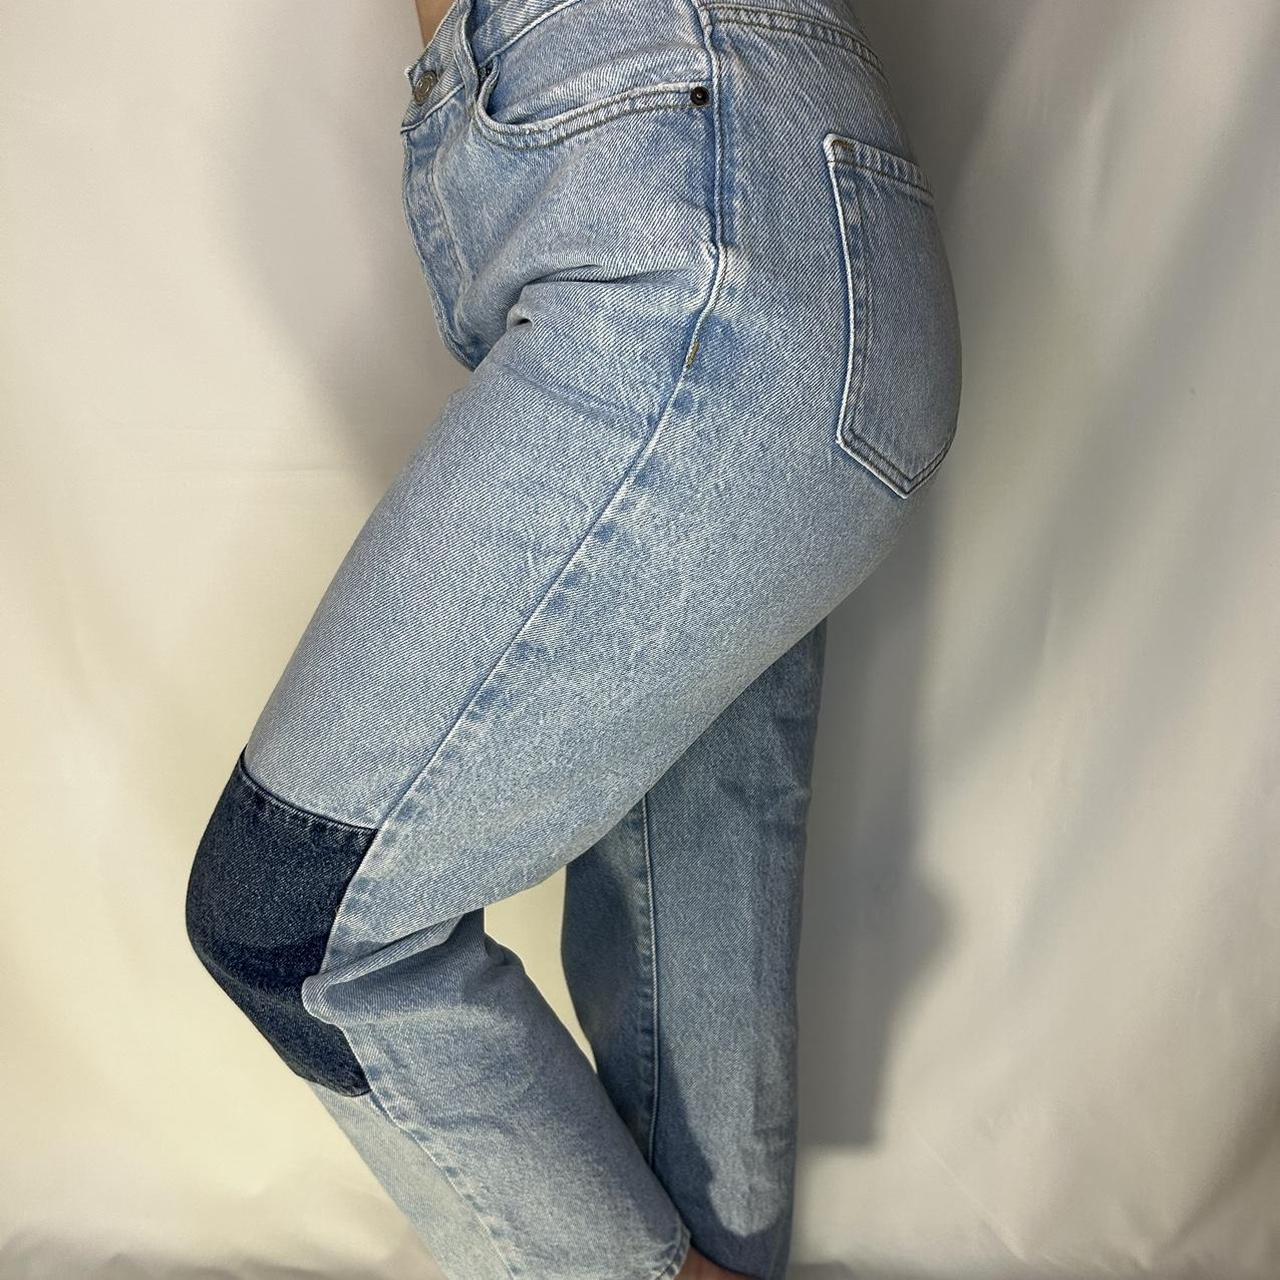 the jeans that look good on everyone.👖 #pacsun